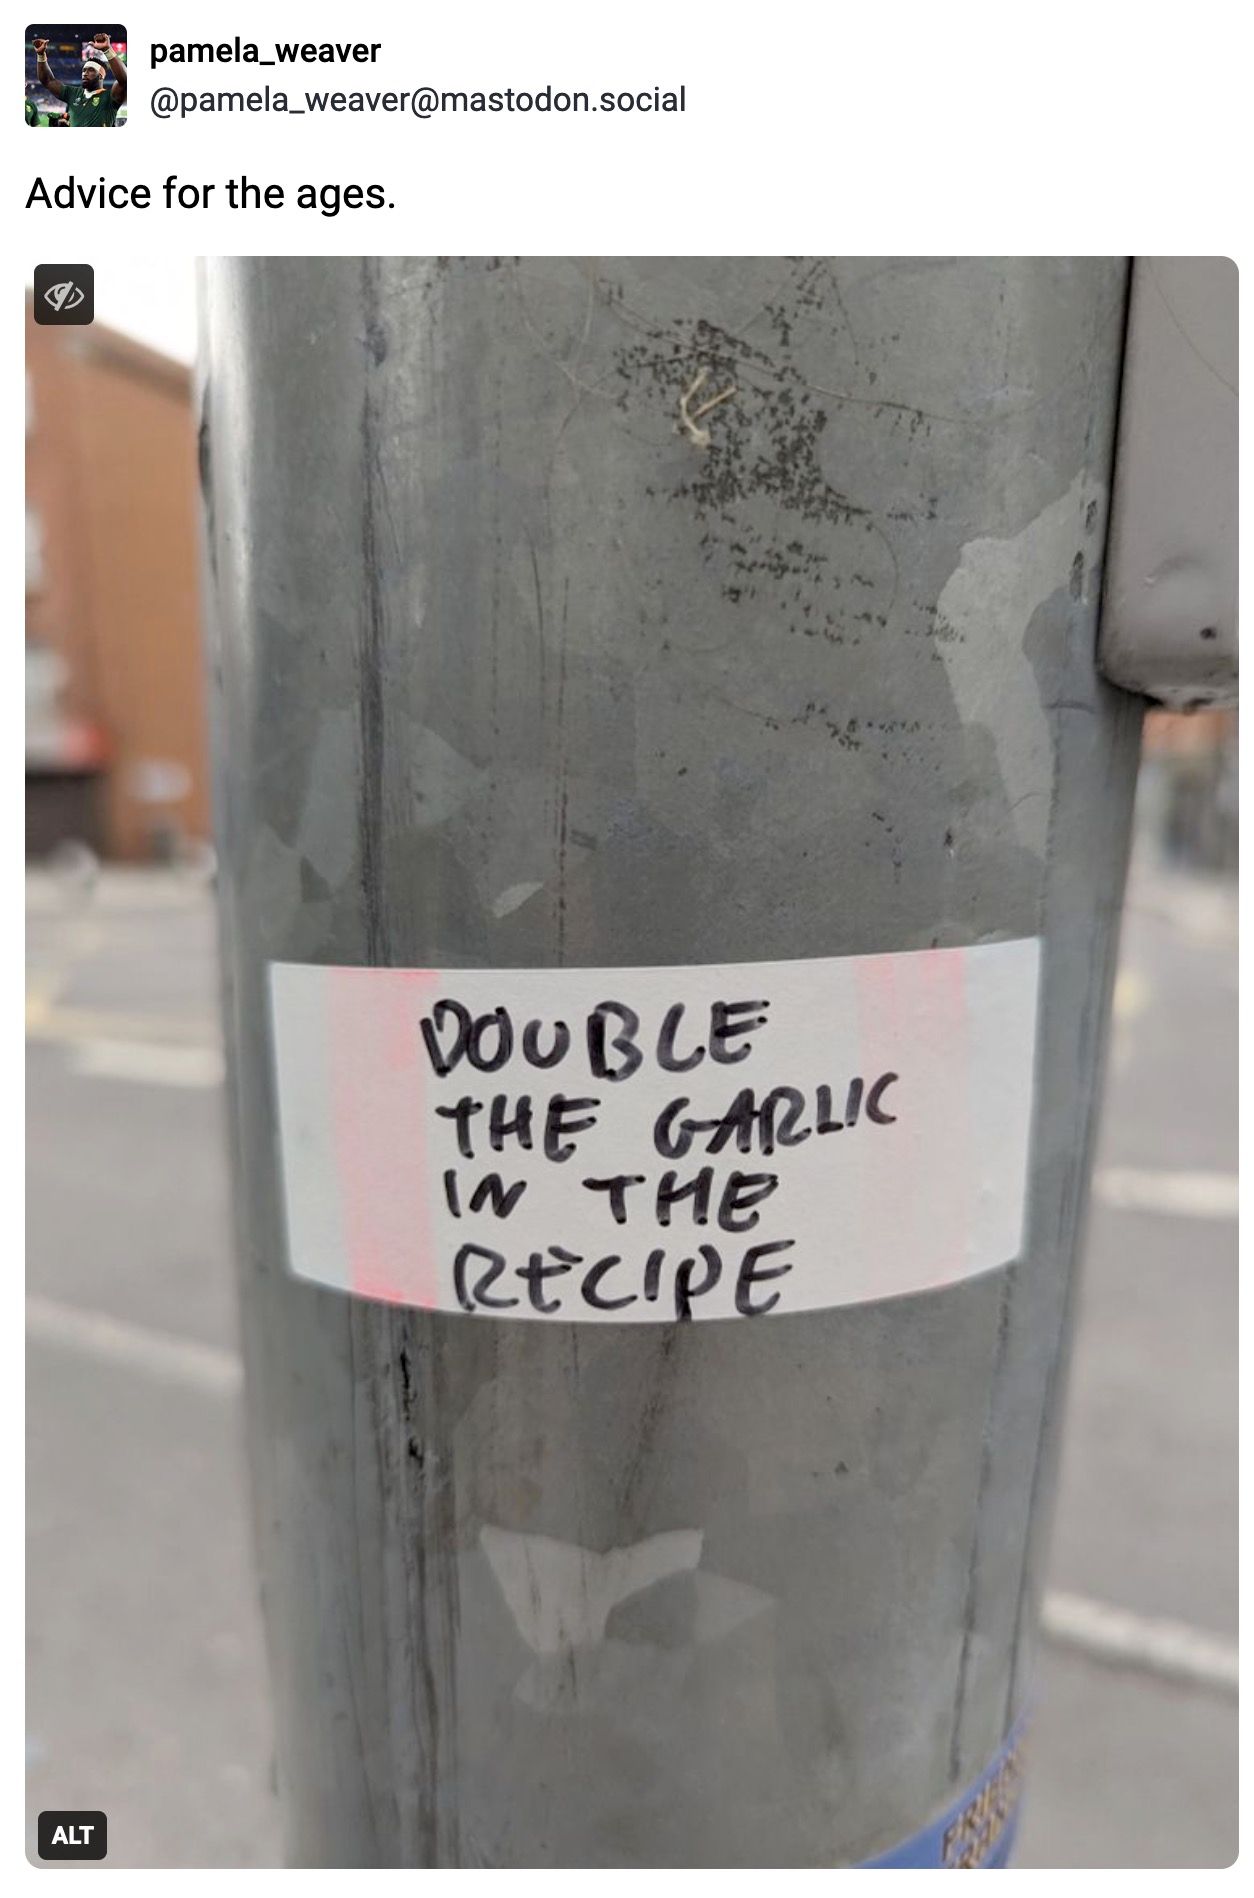 "Advice for the Ages" -- Photo of a sticker on a lampost reading: Double the garlic in the recipe. 